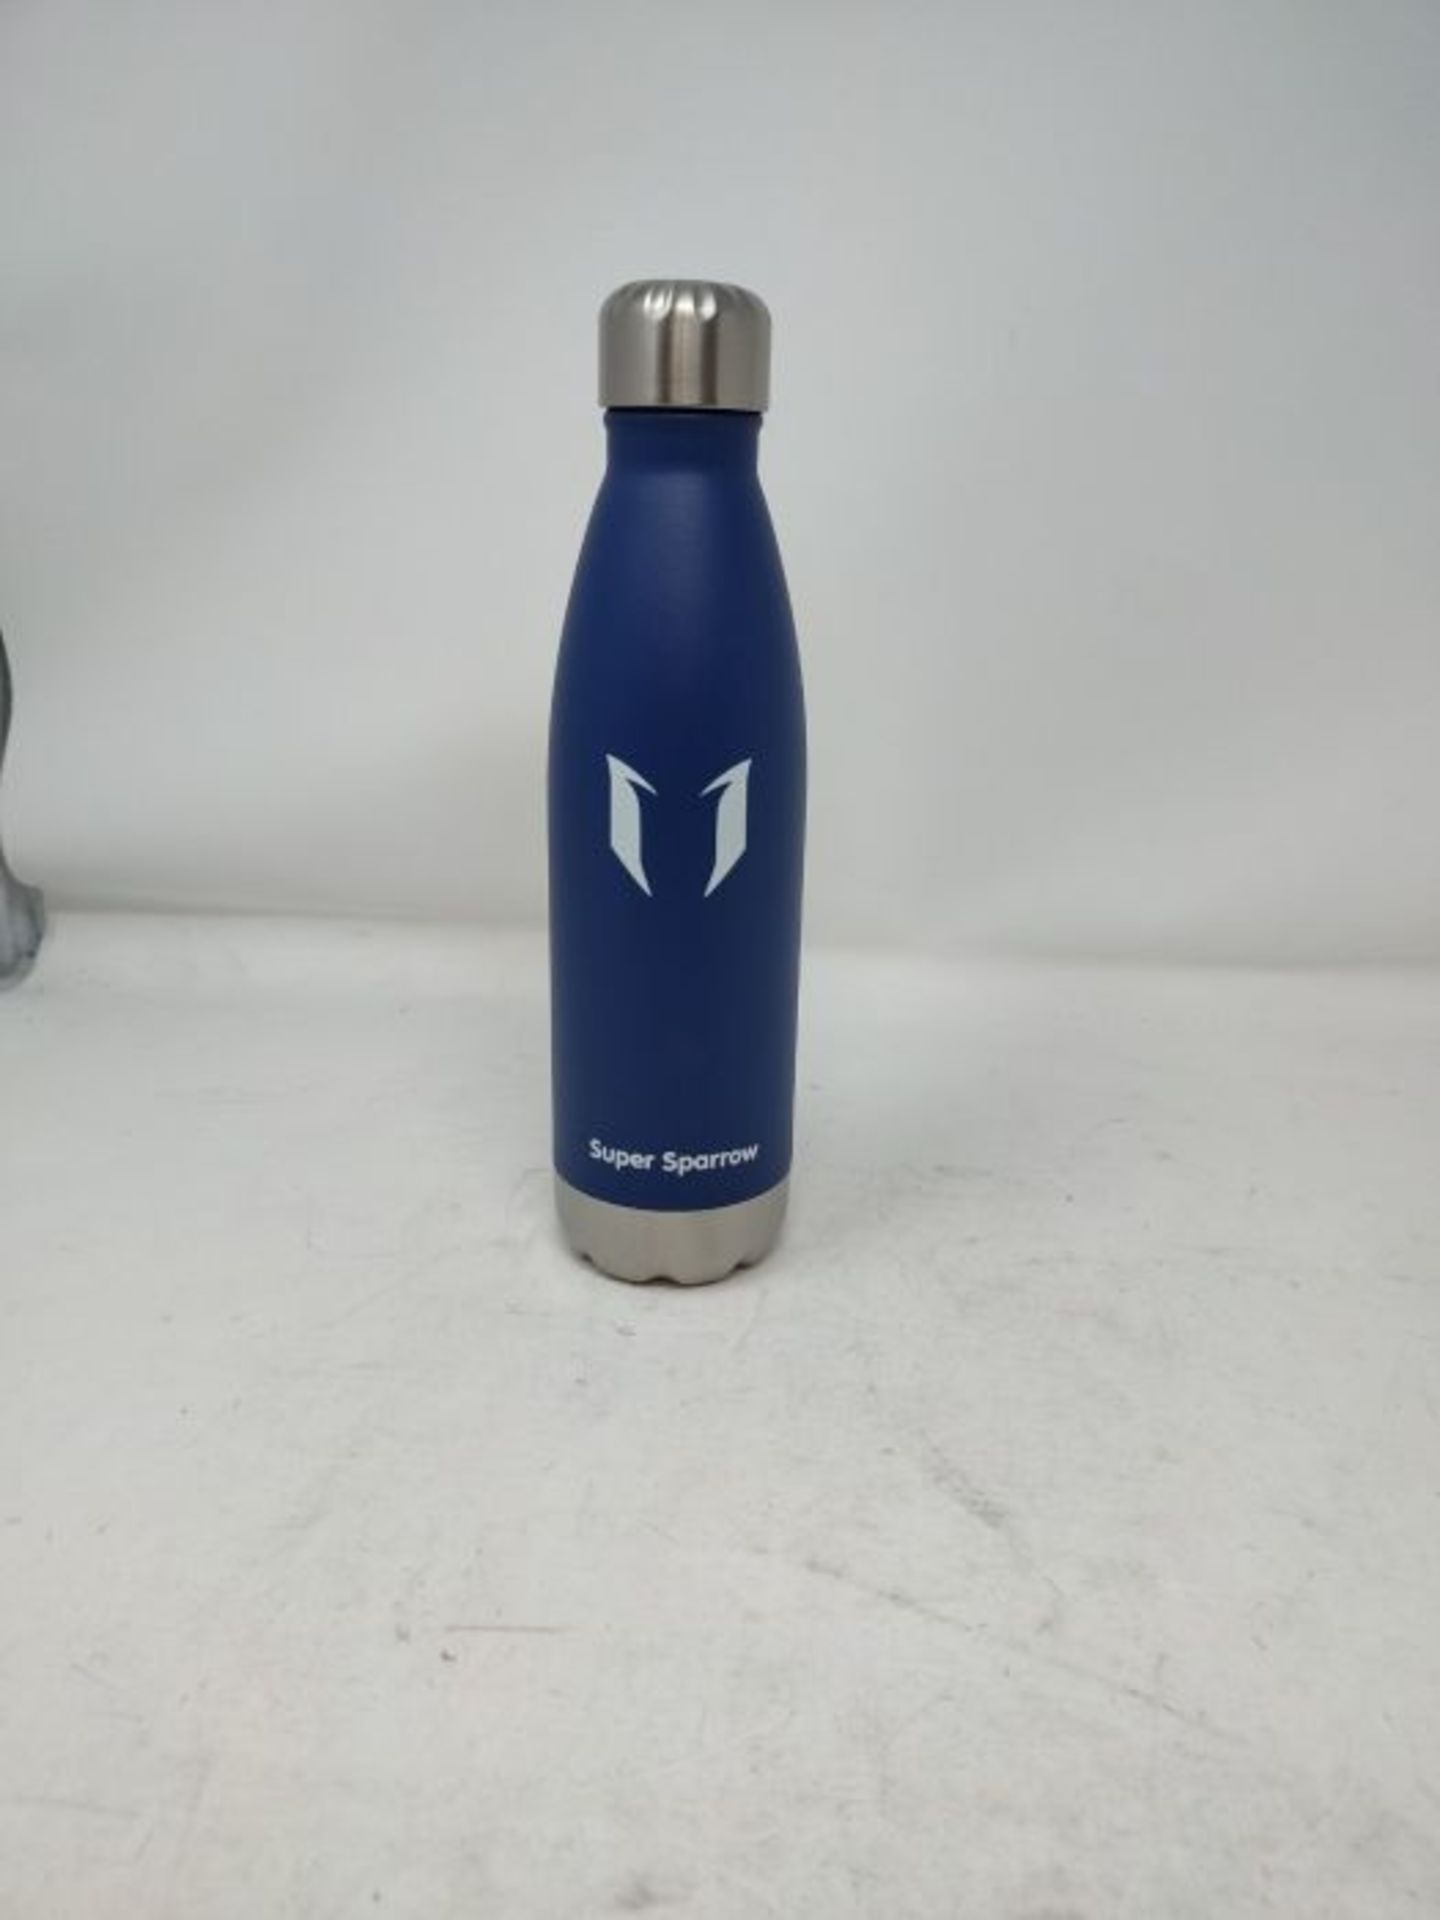 Super Sparrow Water Bottle Double Wall Vacuum Insulated Stainless Steel - Small Mouth - Image 3 of 3